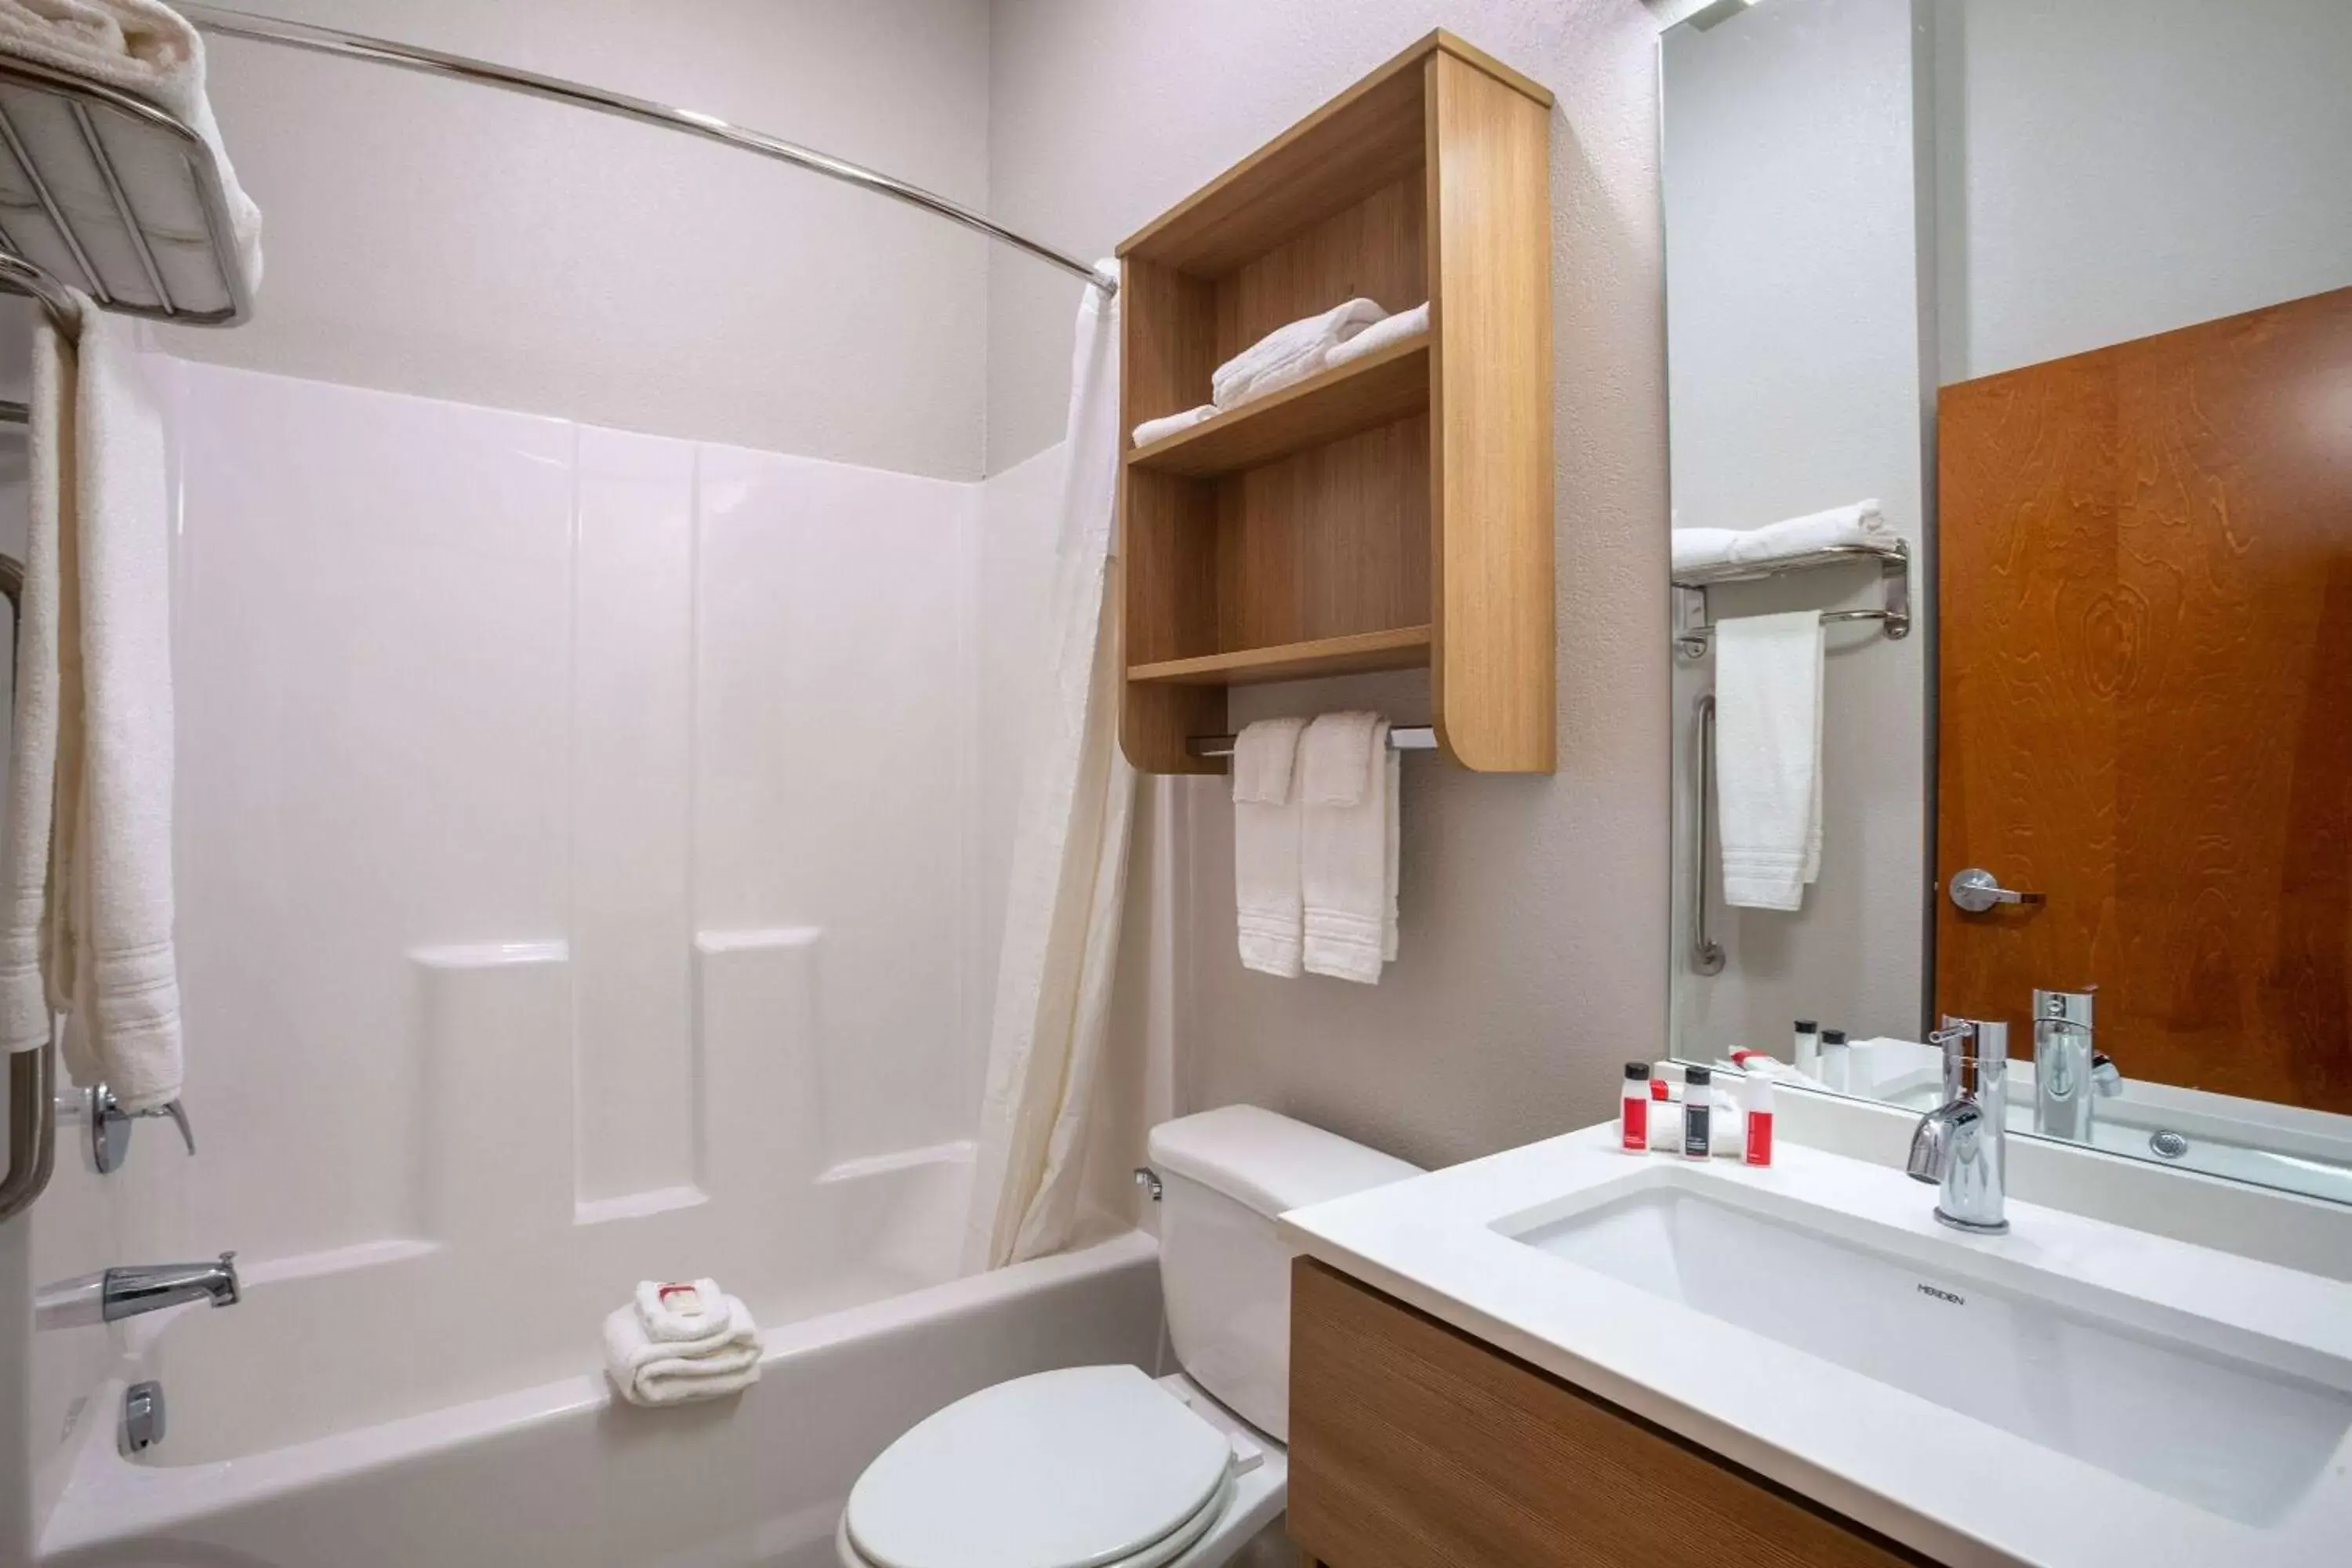 TV and multimedia, Bathroom in Microtel Inn & Suites by Wyndham Liberty NE Kansas City Area